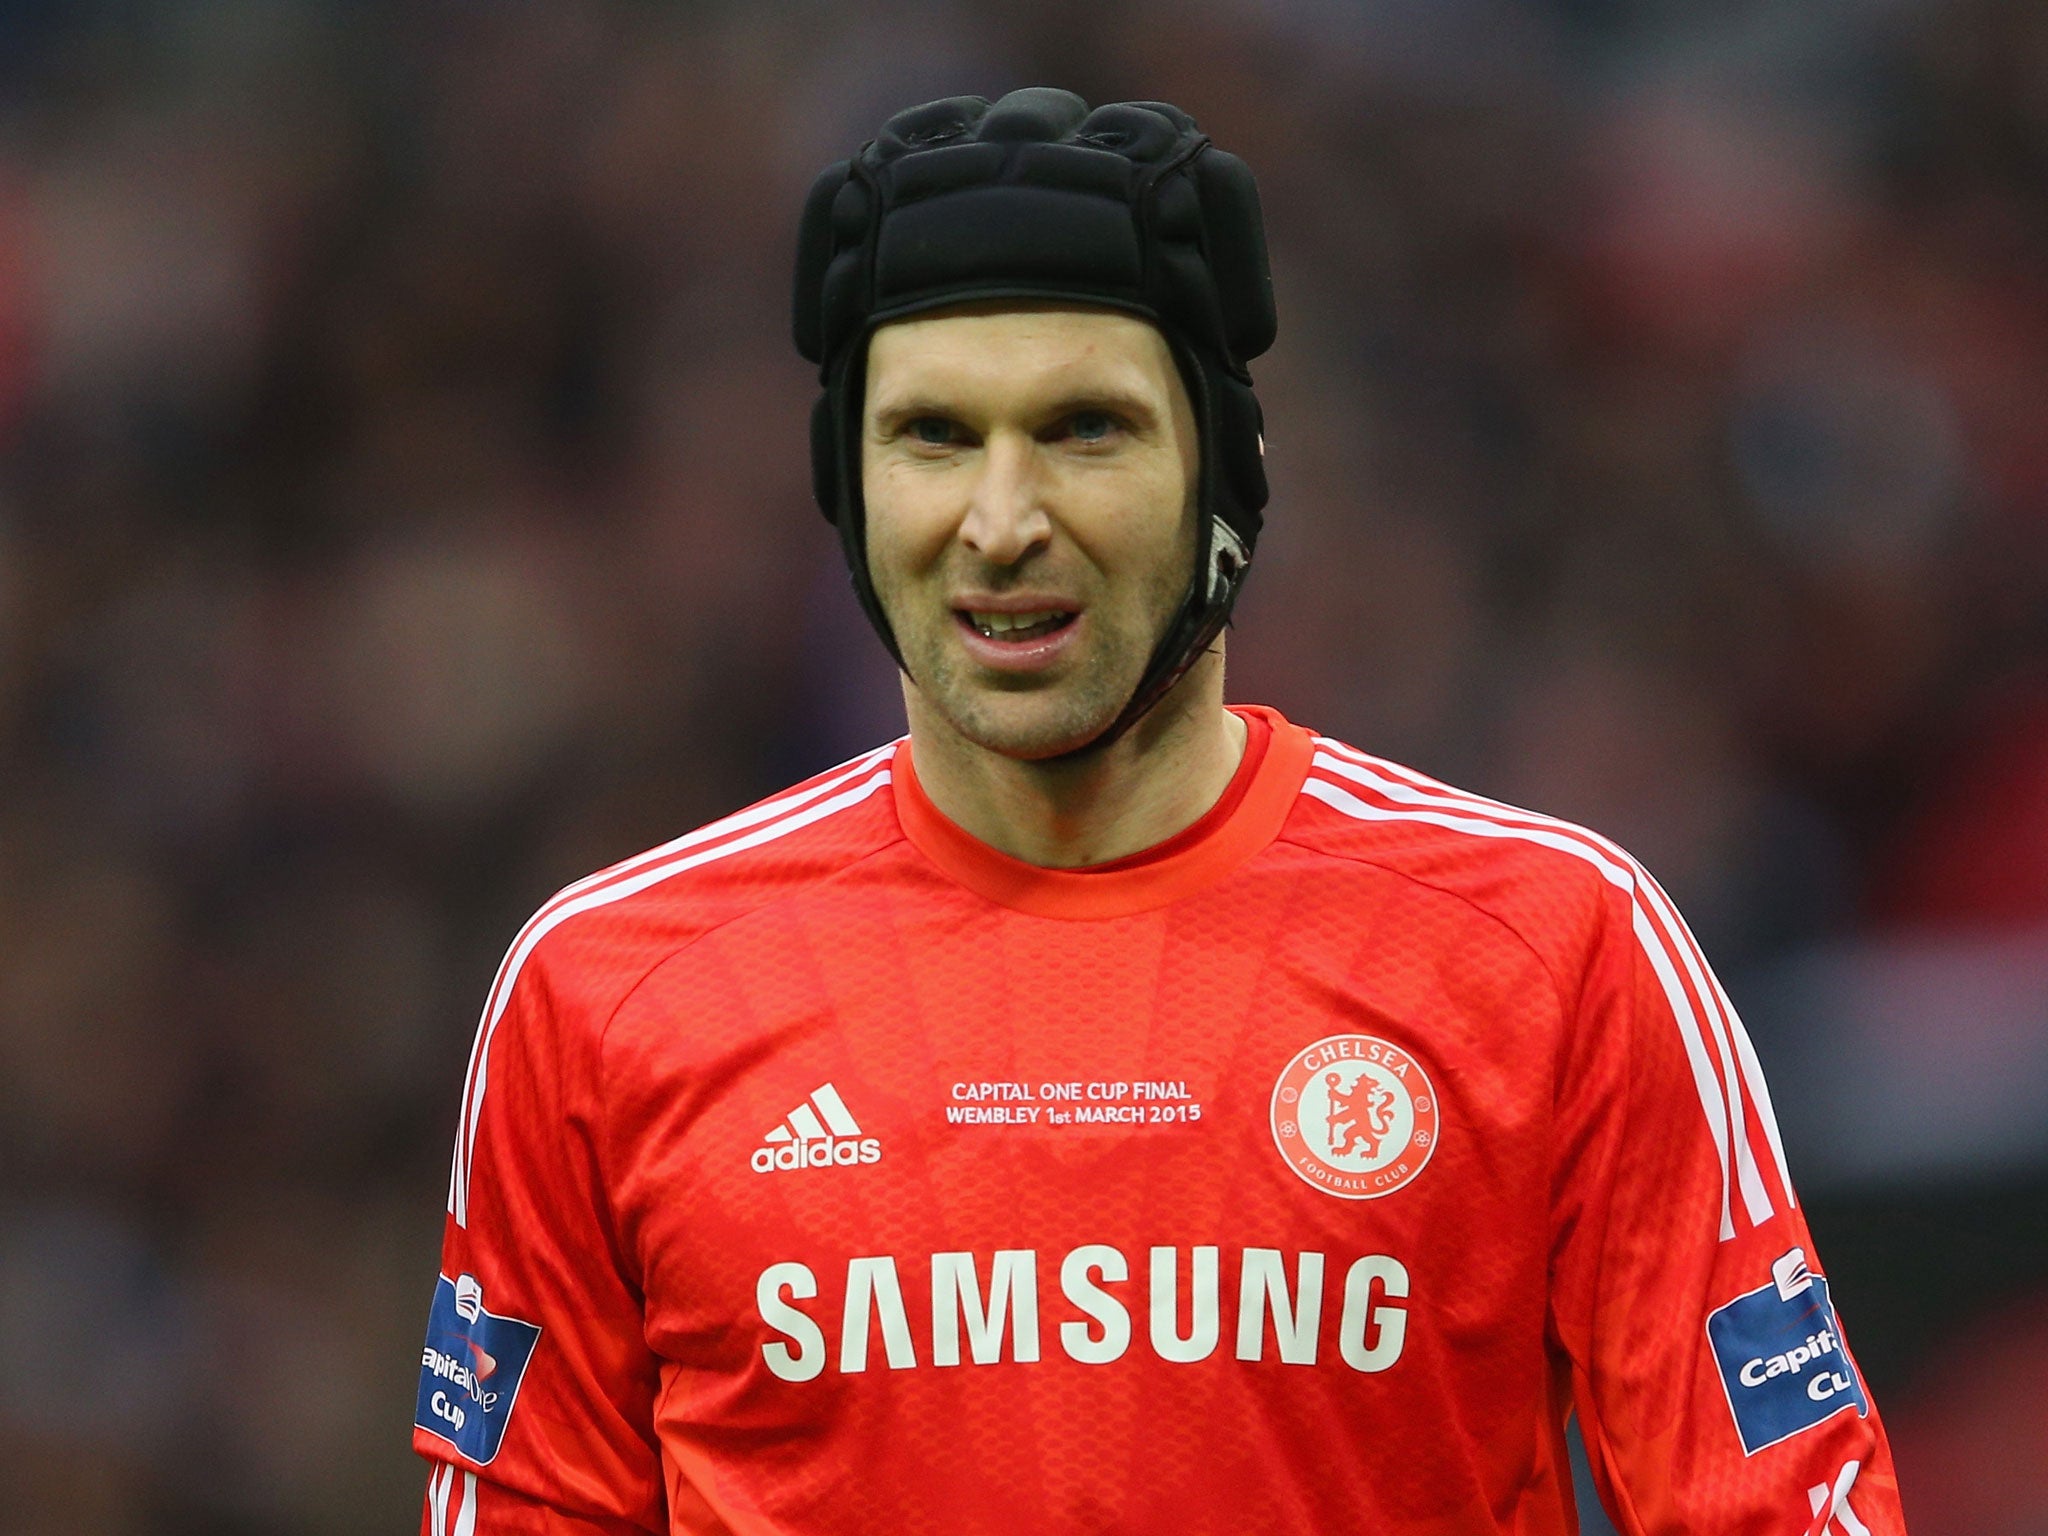 Petr Cech could be on his way to Arsenal